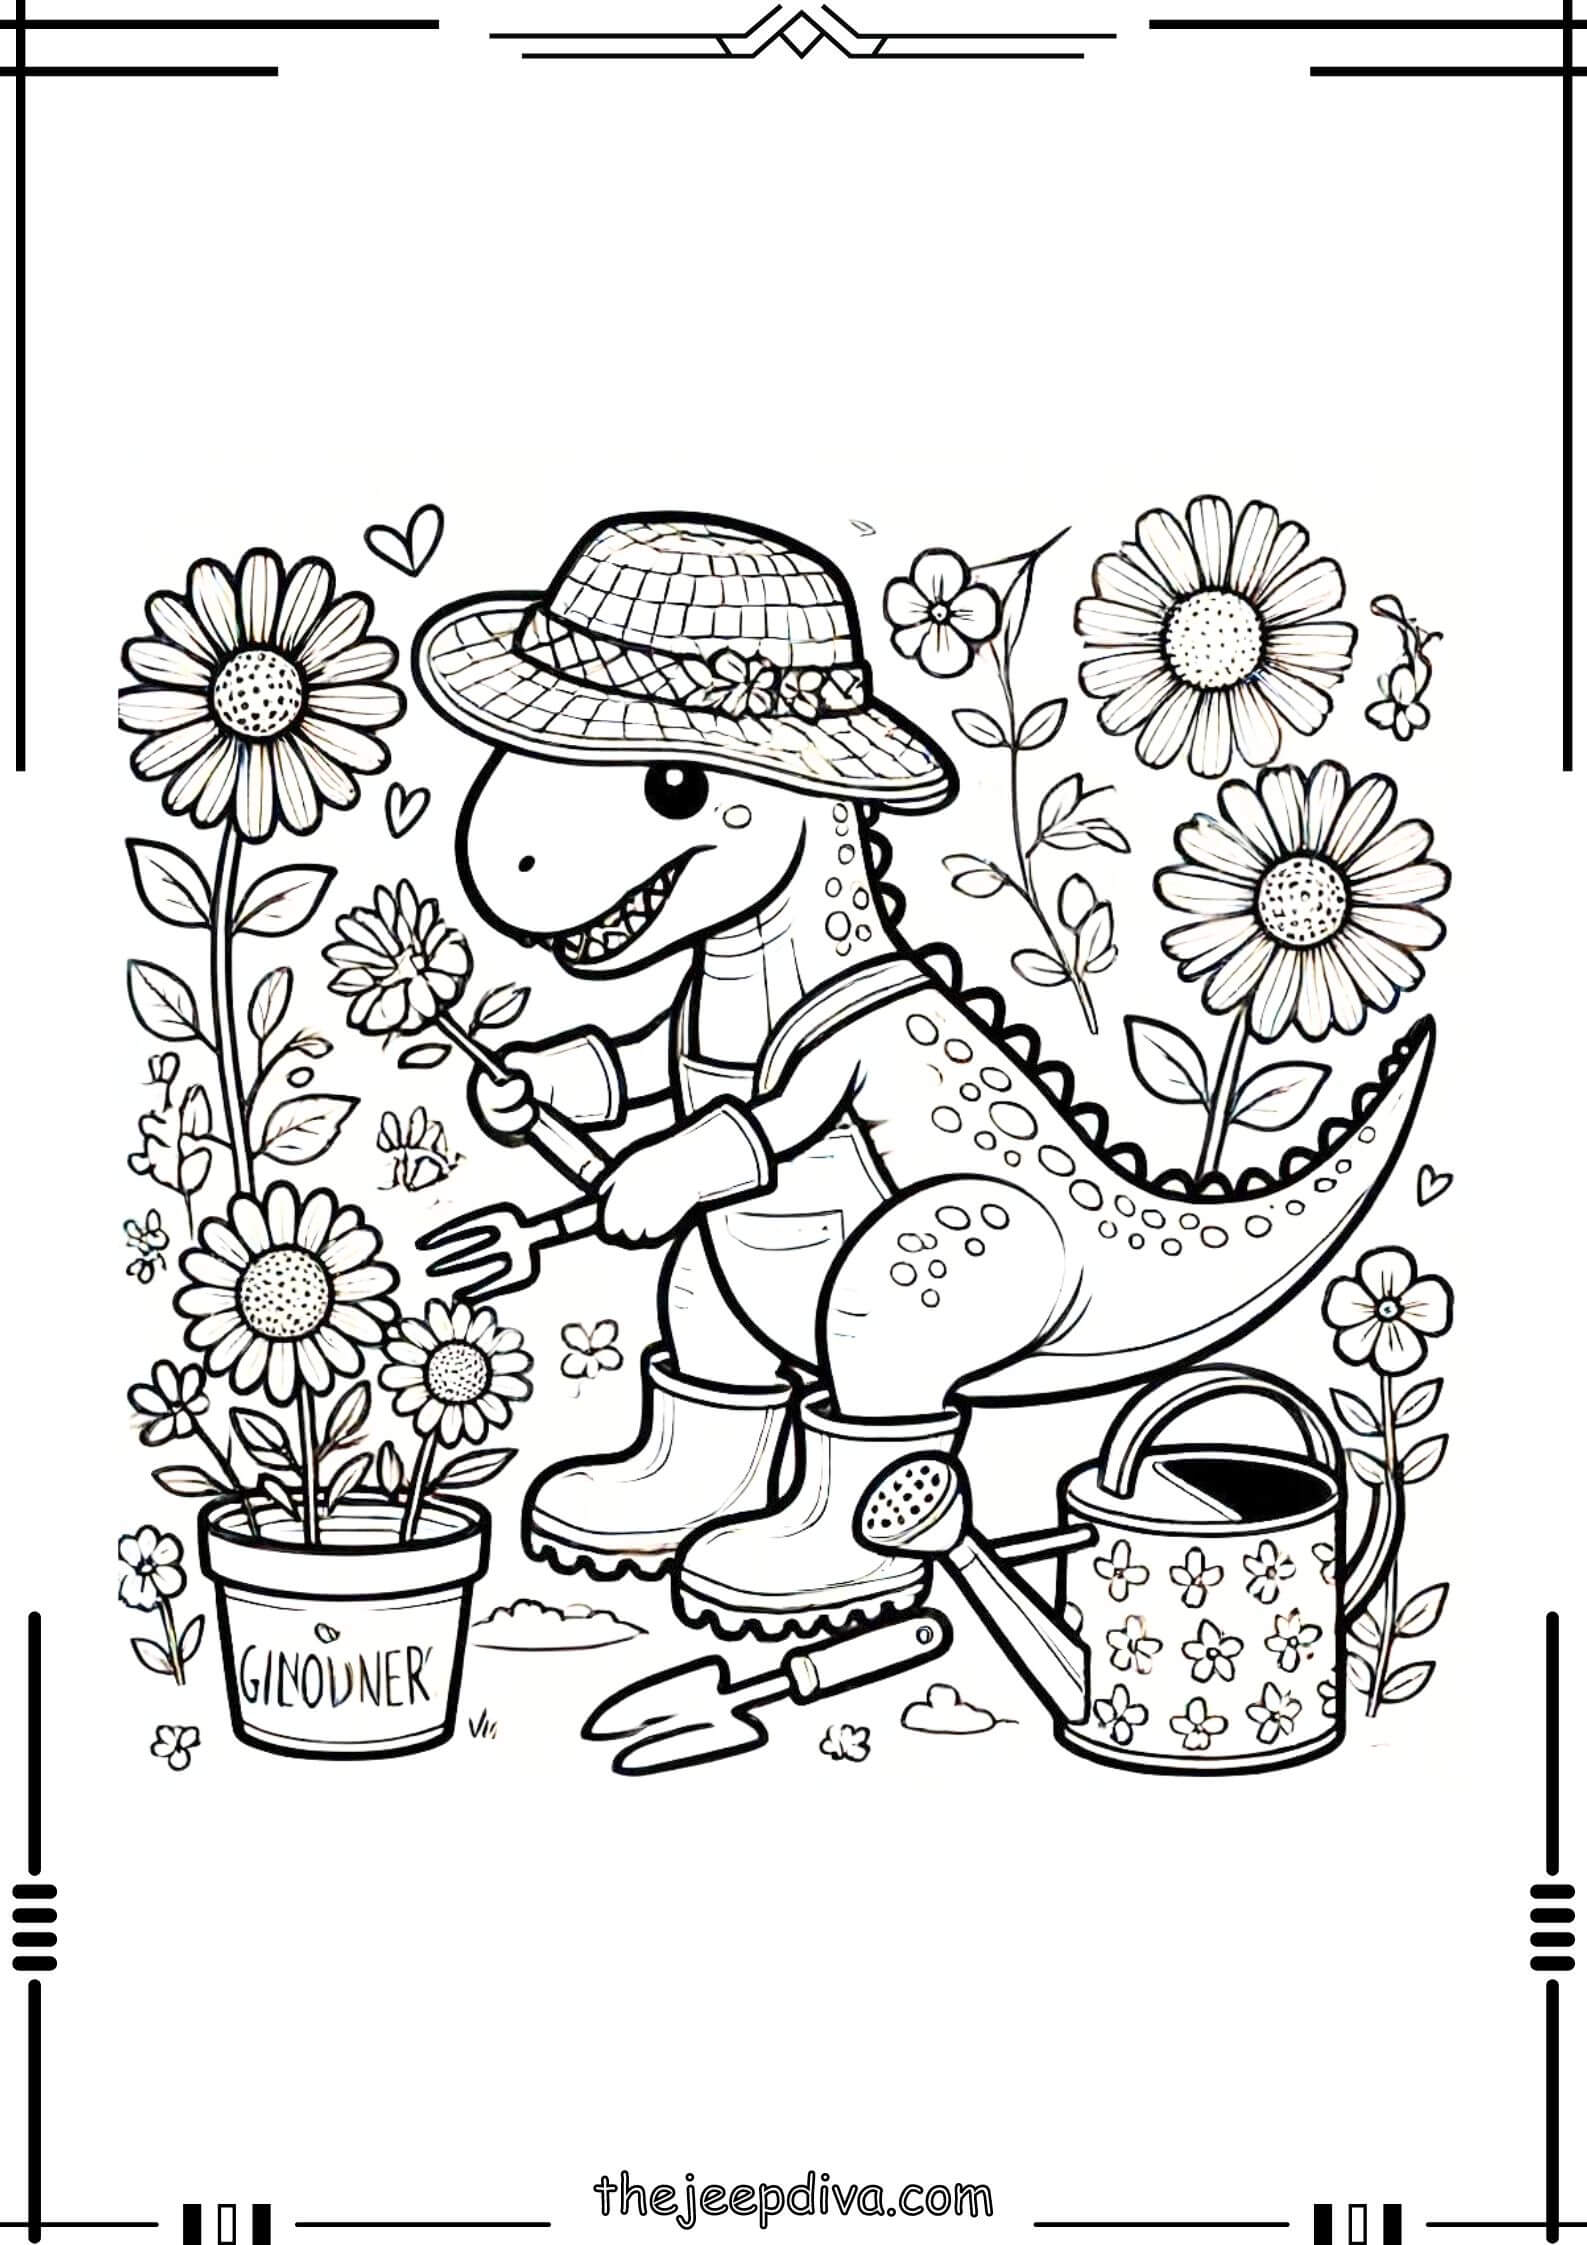 Dinosaur-Colouring-Pages-Hard-7